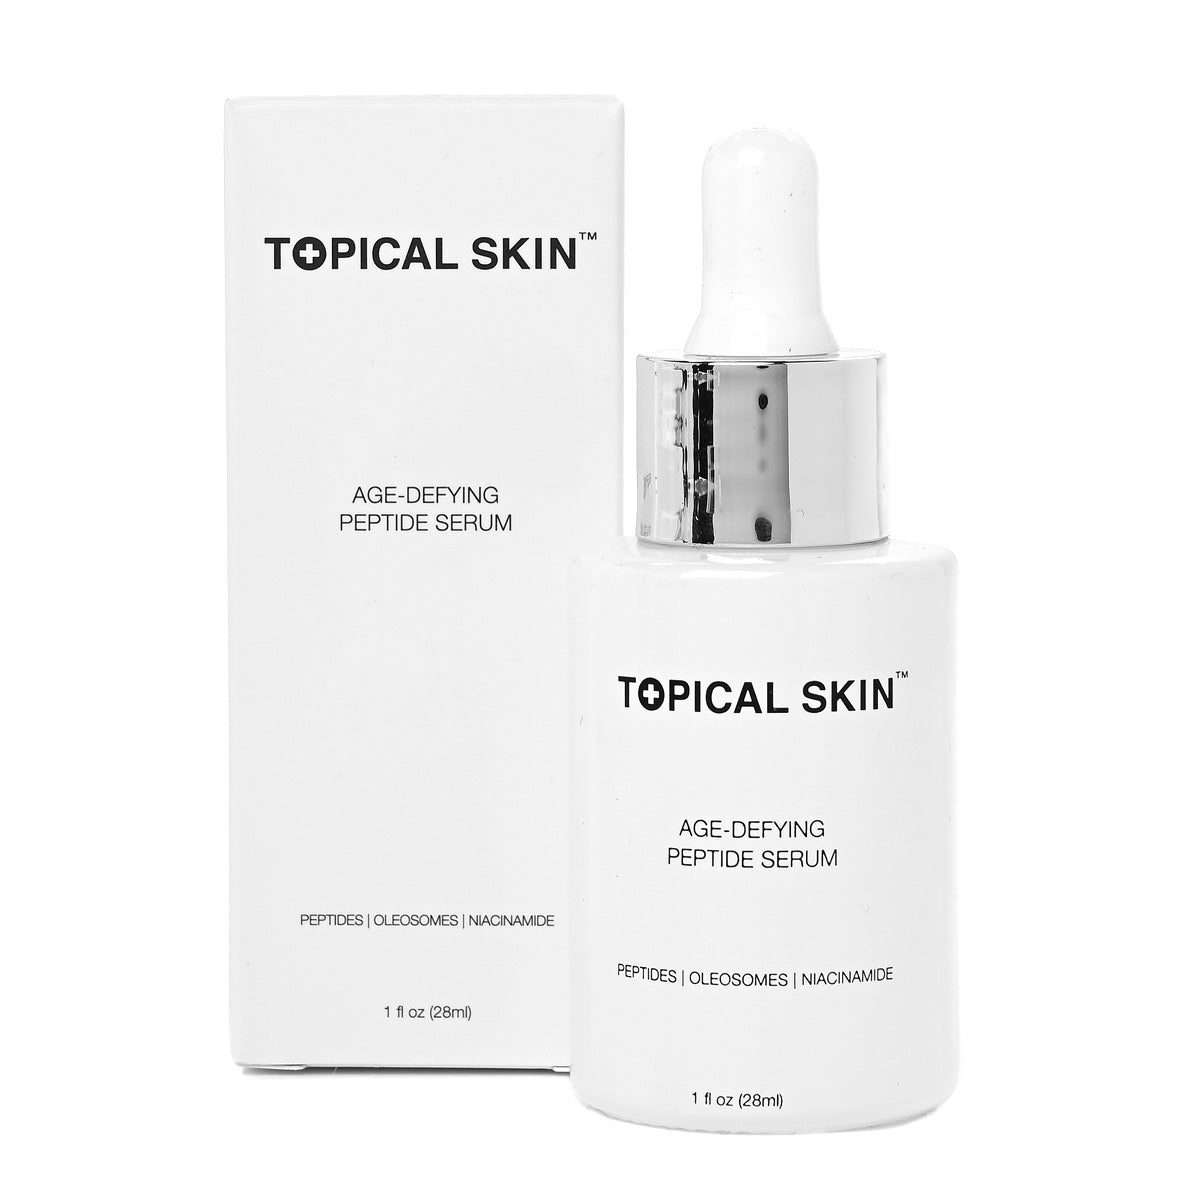 Topical Skin Age-Defying Peptide Serum with Oleosomes and anti-glycation Carnosine